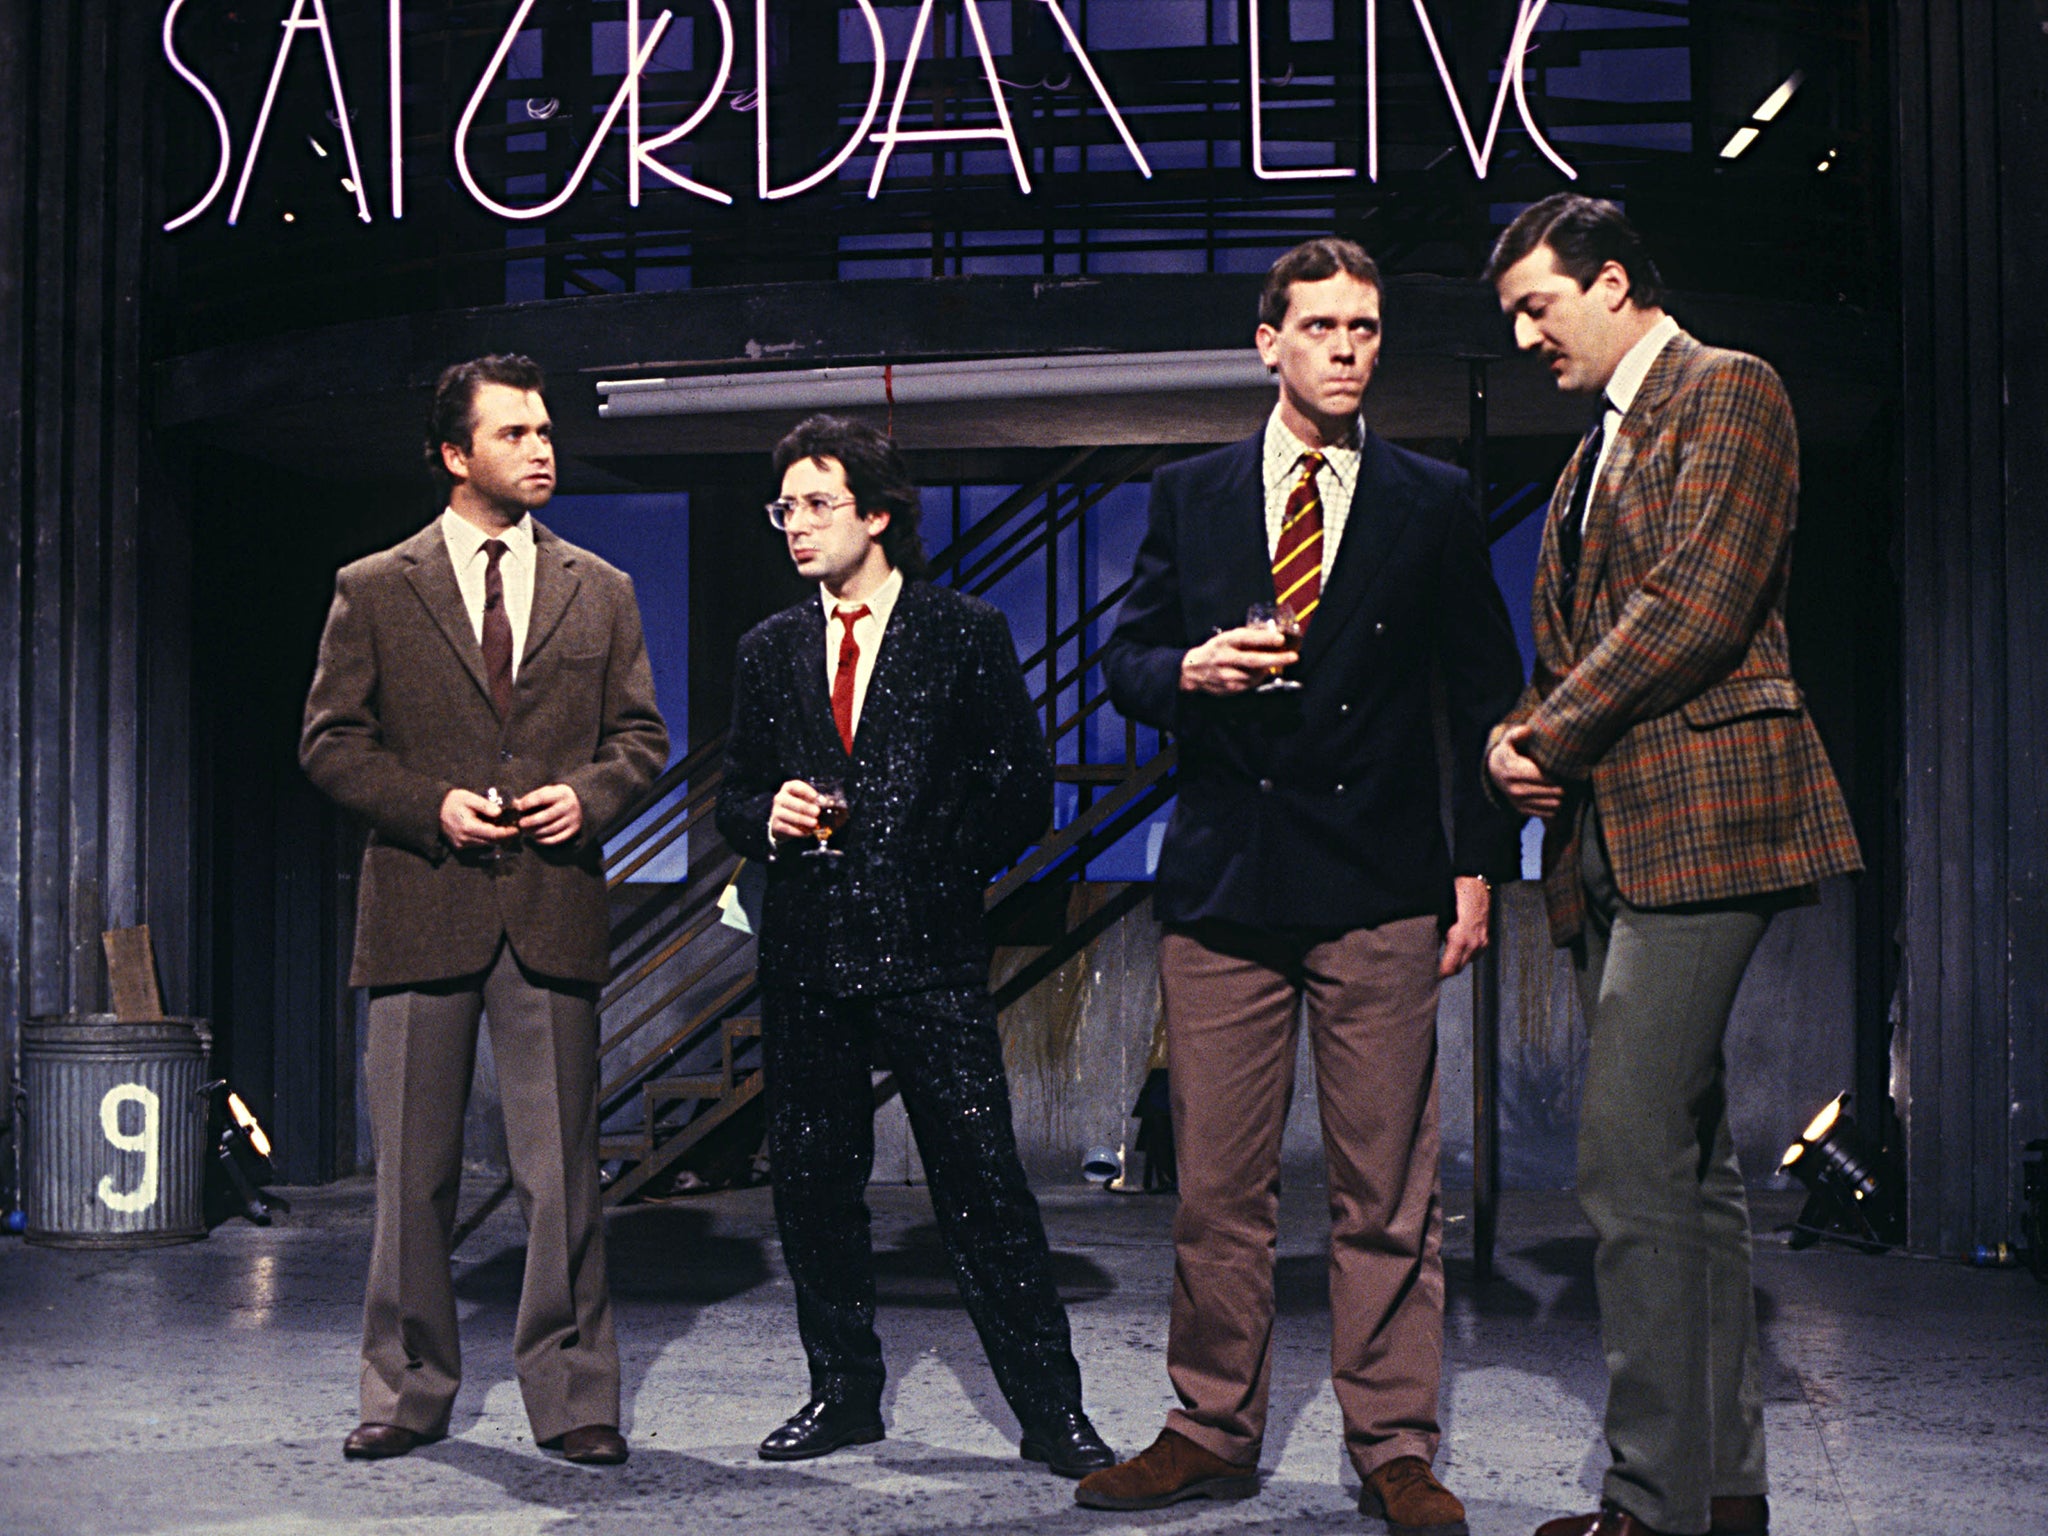 'Saturday Live' made stars of Harry Enfield, Ben Elton, Hugh Laurie and Stephen Fry